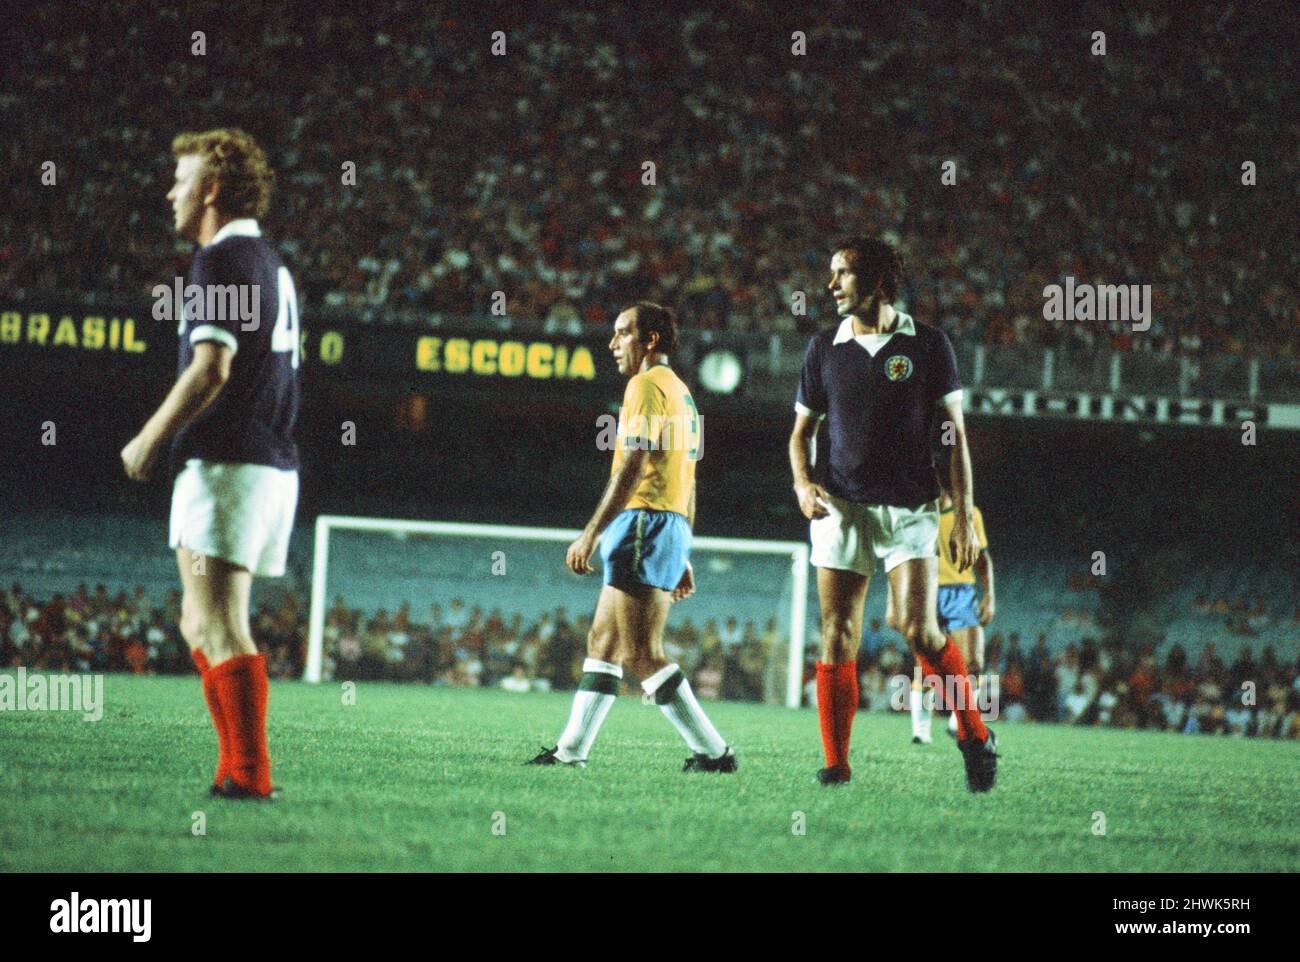 Brazil 1-0 Scotland, 1972 Brazil Independence Cup, final stage, Group A match at the Estadio do Maracana, Rio de Janeiro, Brazil, Wednesday 5th July 1972. Pictured, Gerson of Brazil with Billy Bremner and George Graham. Stock Photo